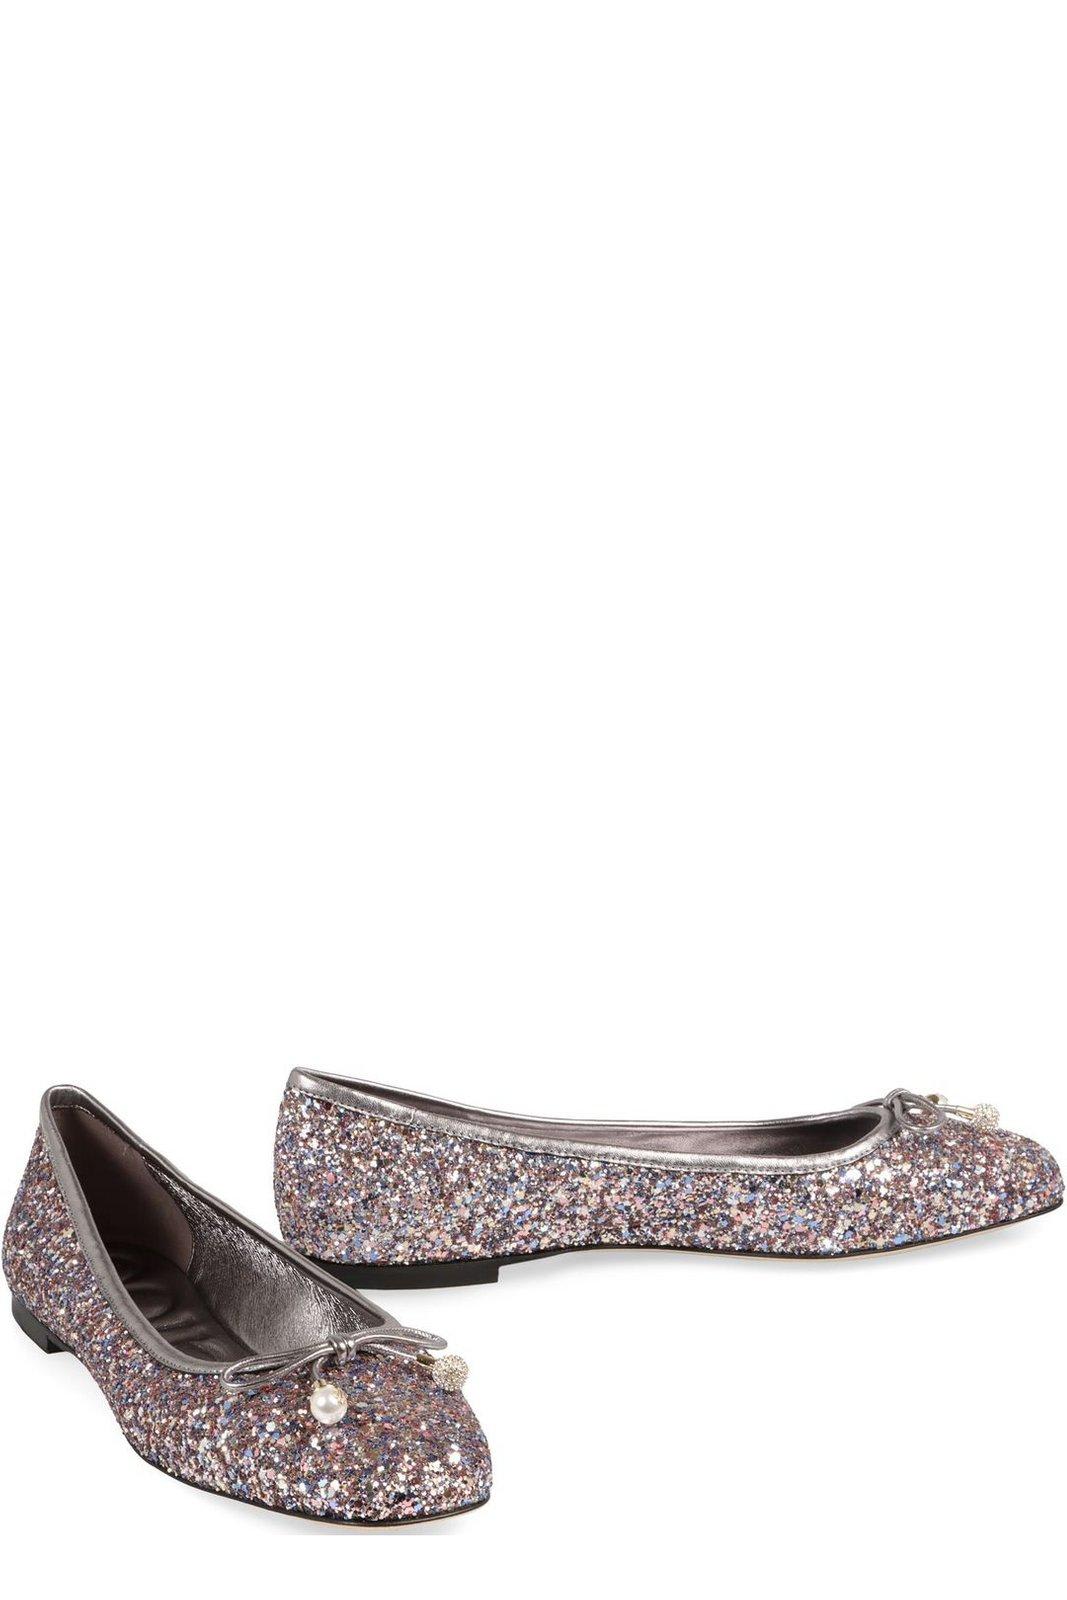 Shop Jimmy Choo Glittered Bow-embellished Flat Shoes In Silver